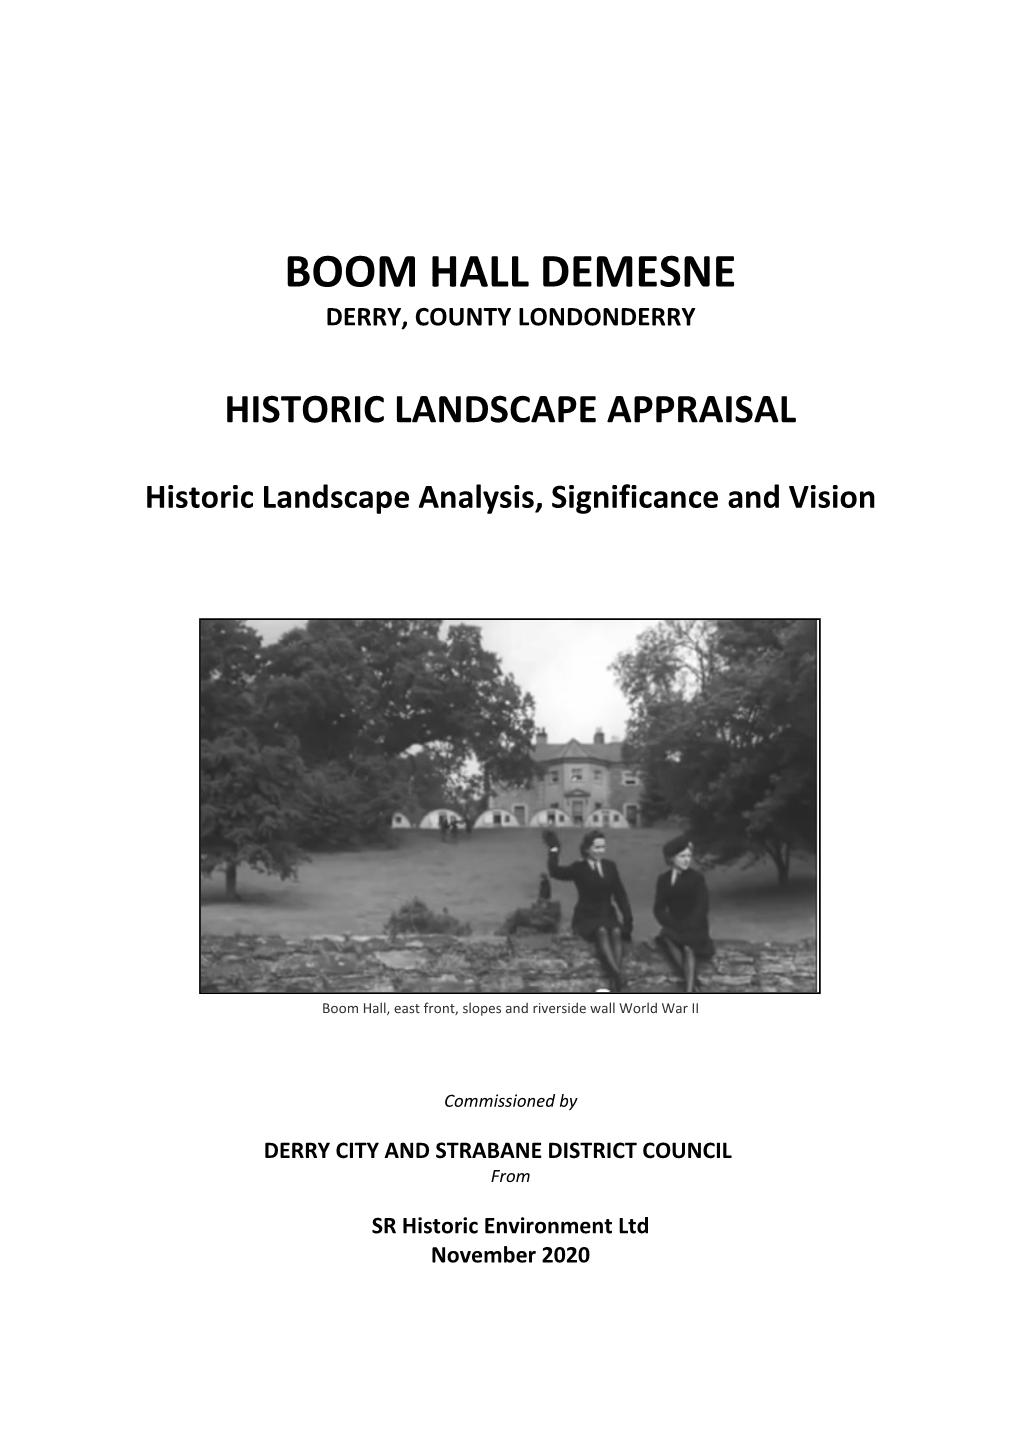 Boom Hall Demesne Derry, County Londonderry